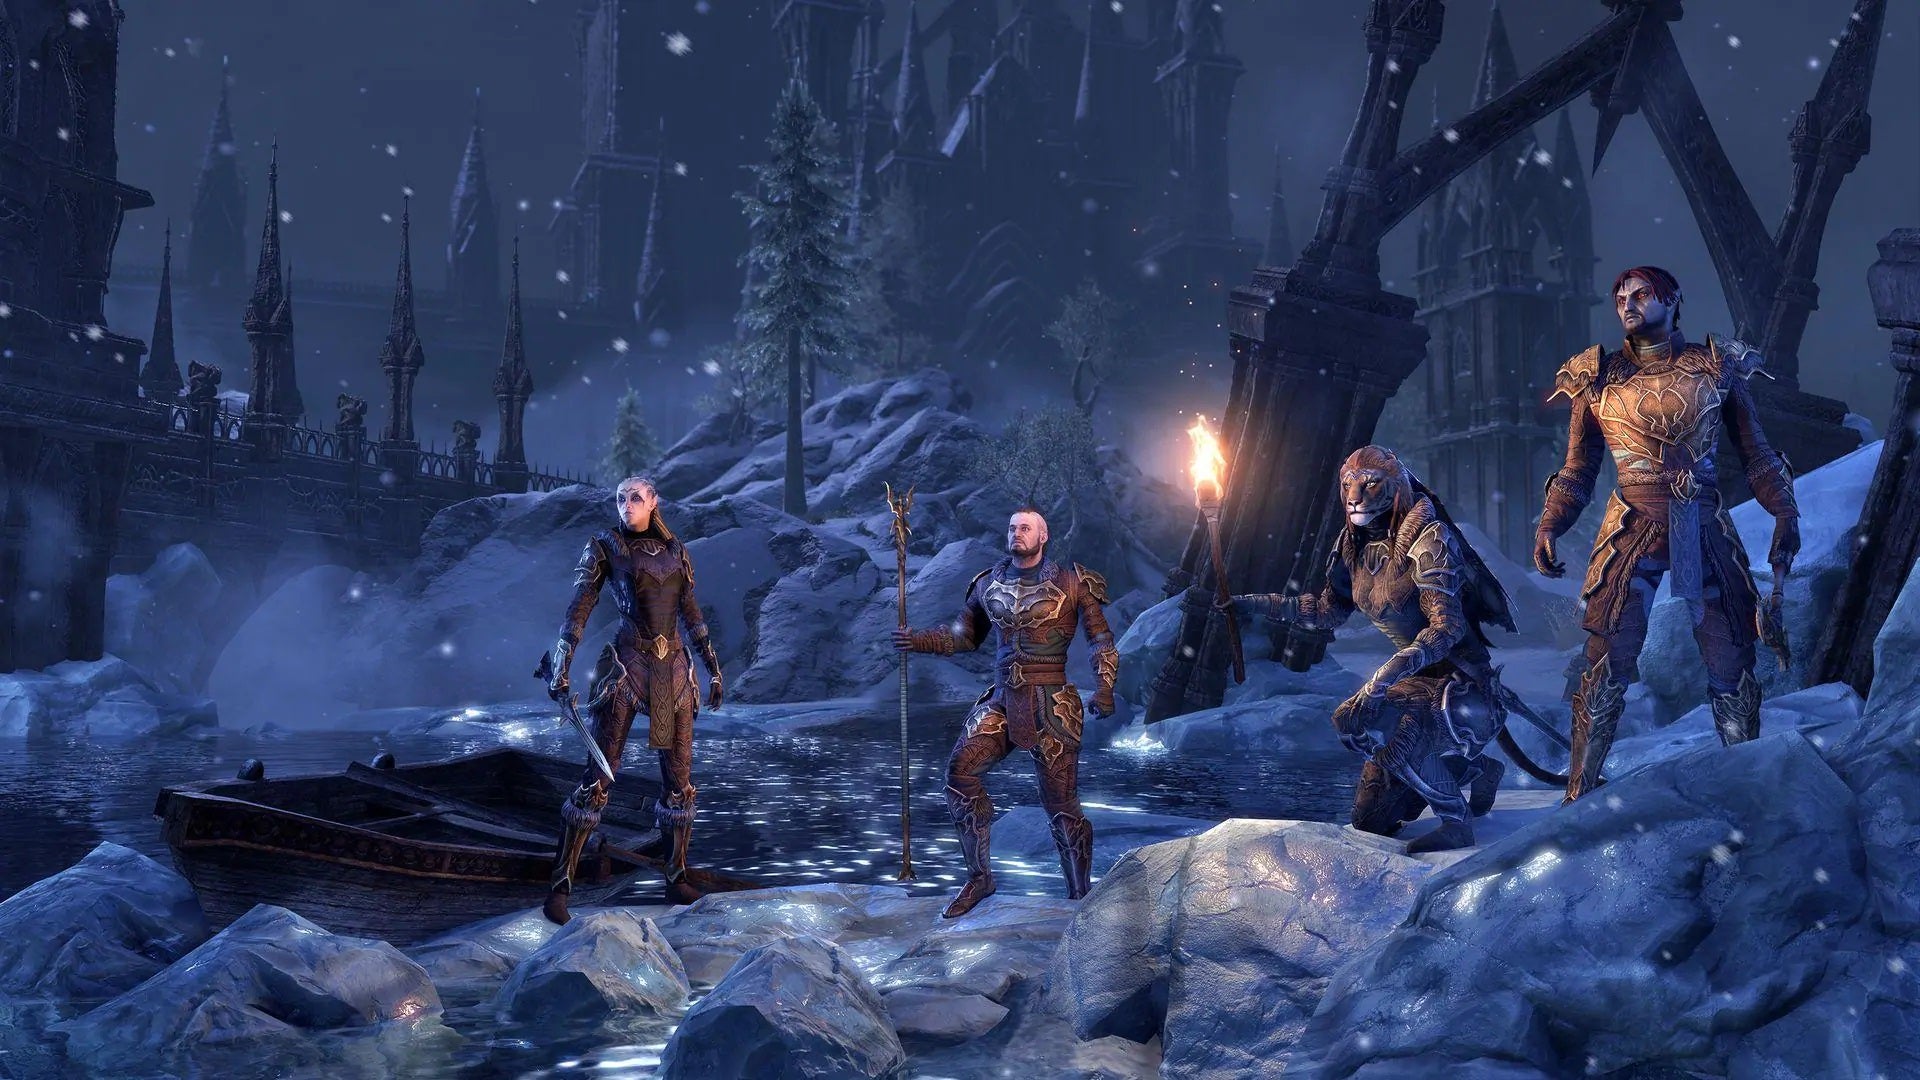 Image for The Elder Scrolls online ends its Skyrim storyline with a visit to Markarth this November